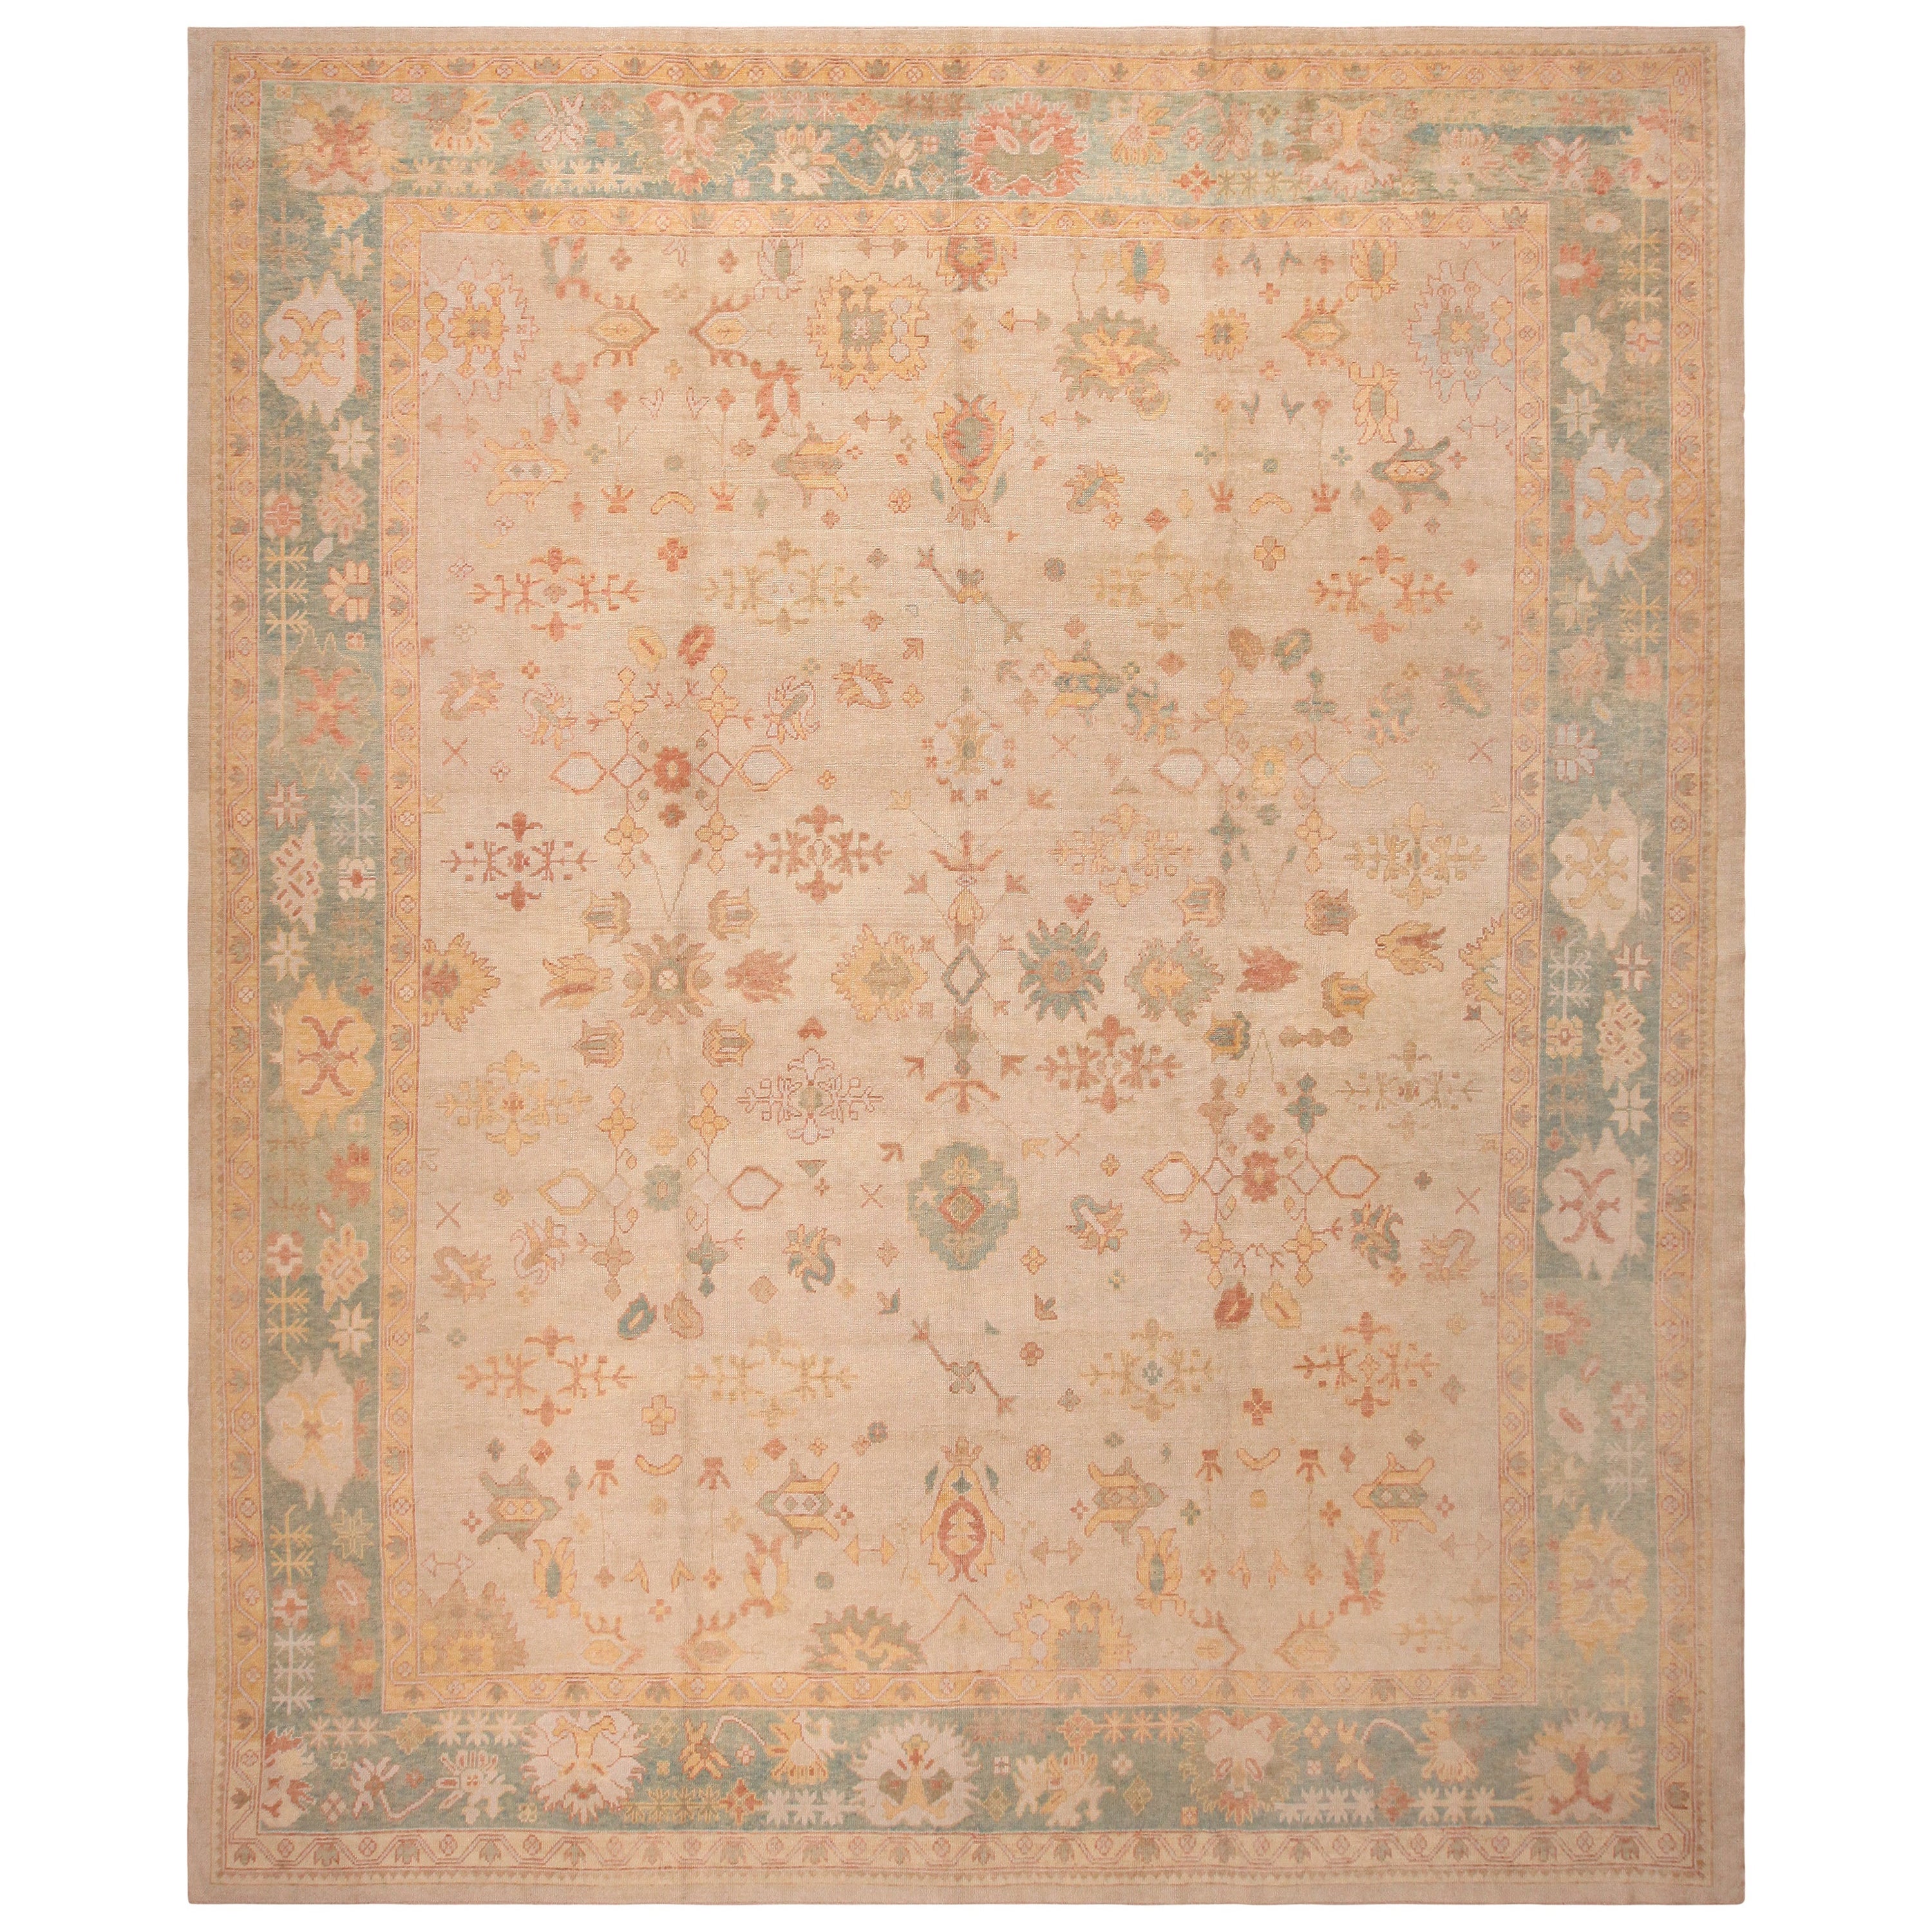 Nazmiyal Collection Large Modern Turkish Oushak Rug. 13 ft 10 in x 16 ft 6 in For Sale